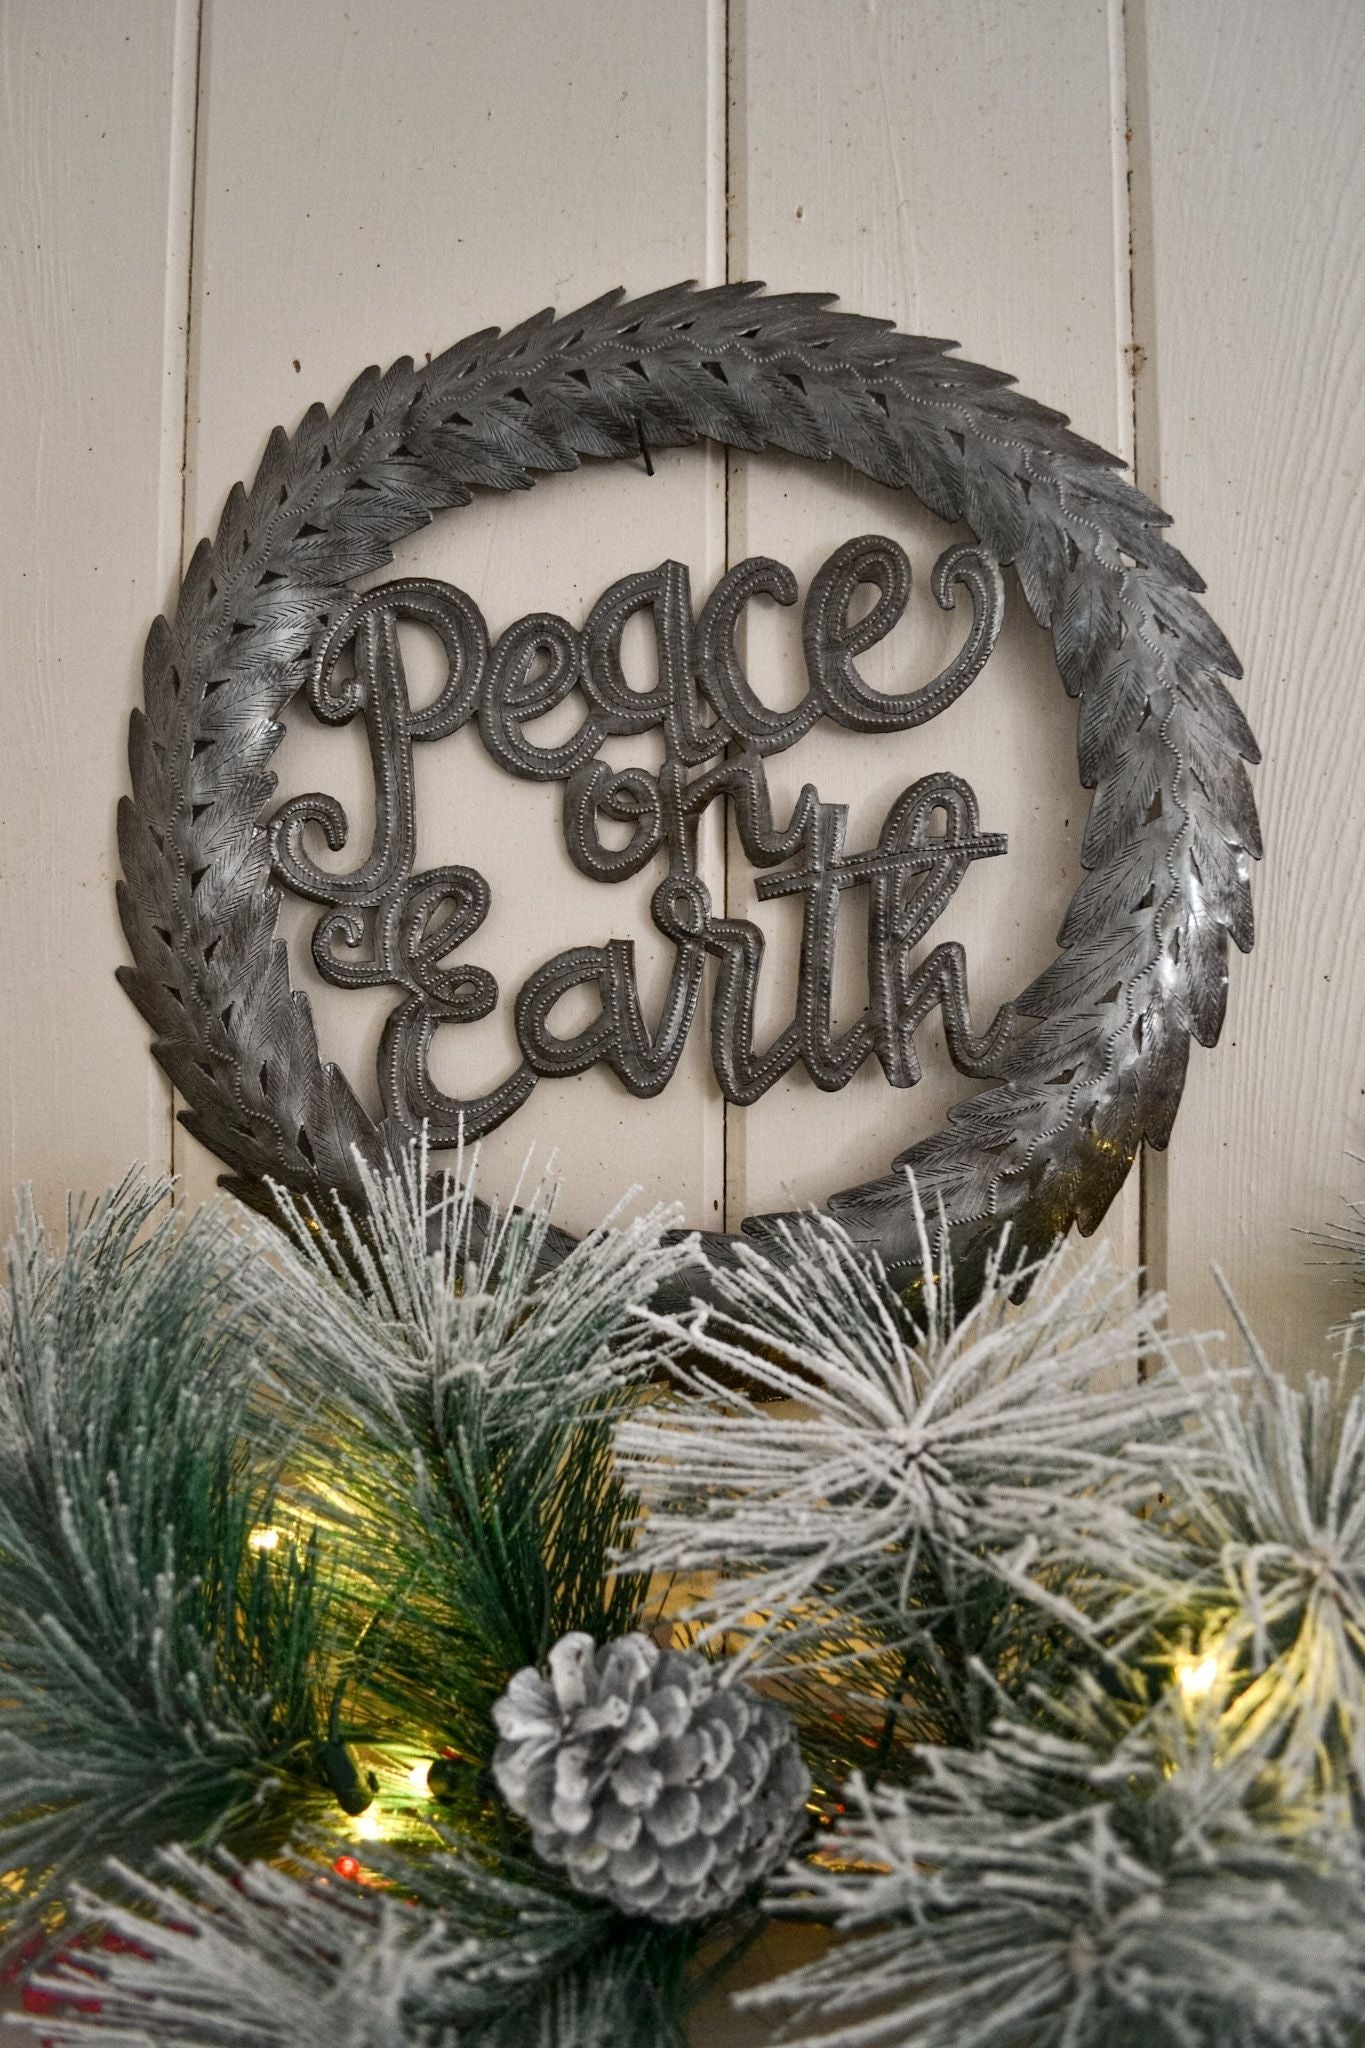 Handcrafted Recycled Steel Holiday Wreath - Spread the joy and peace of the season with this unique and sustainable piece of art.